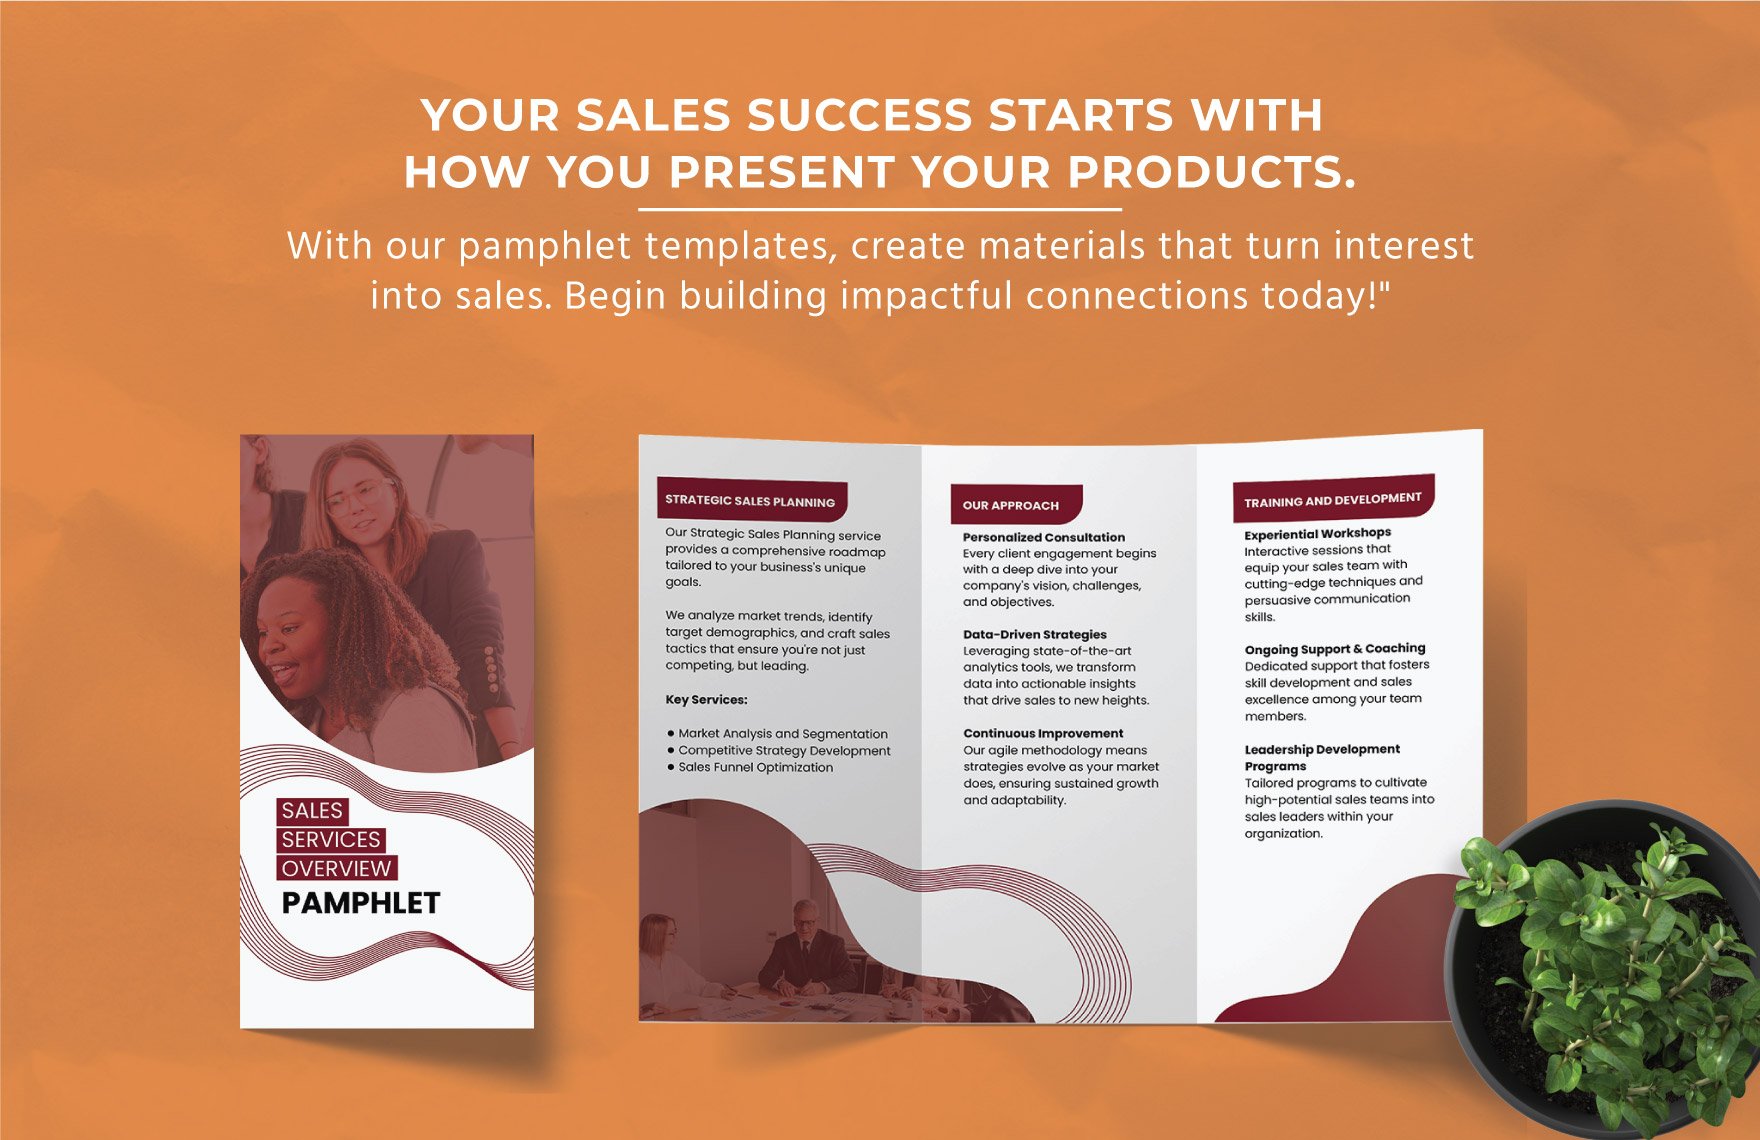 Sales Services Overview Pamphlet Template